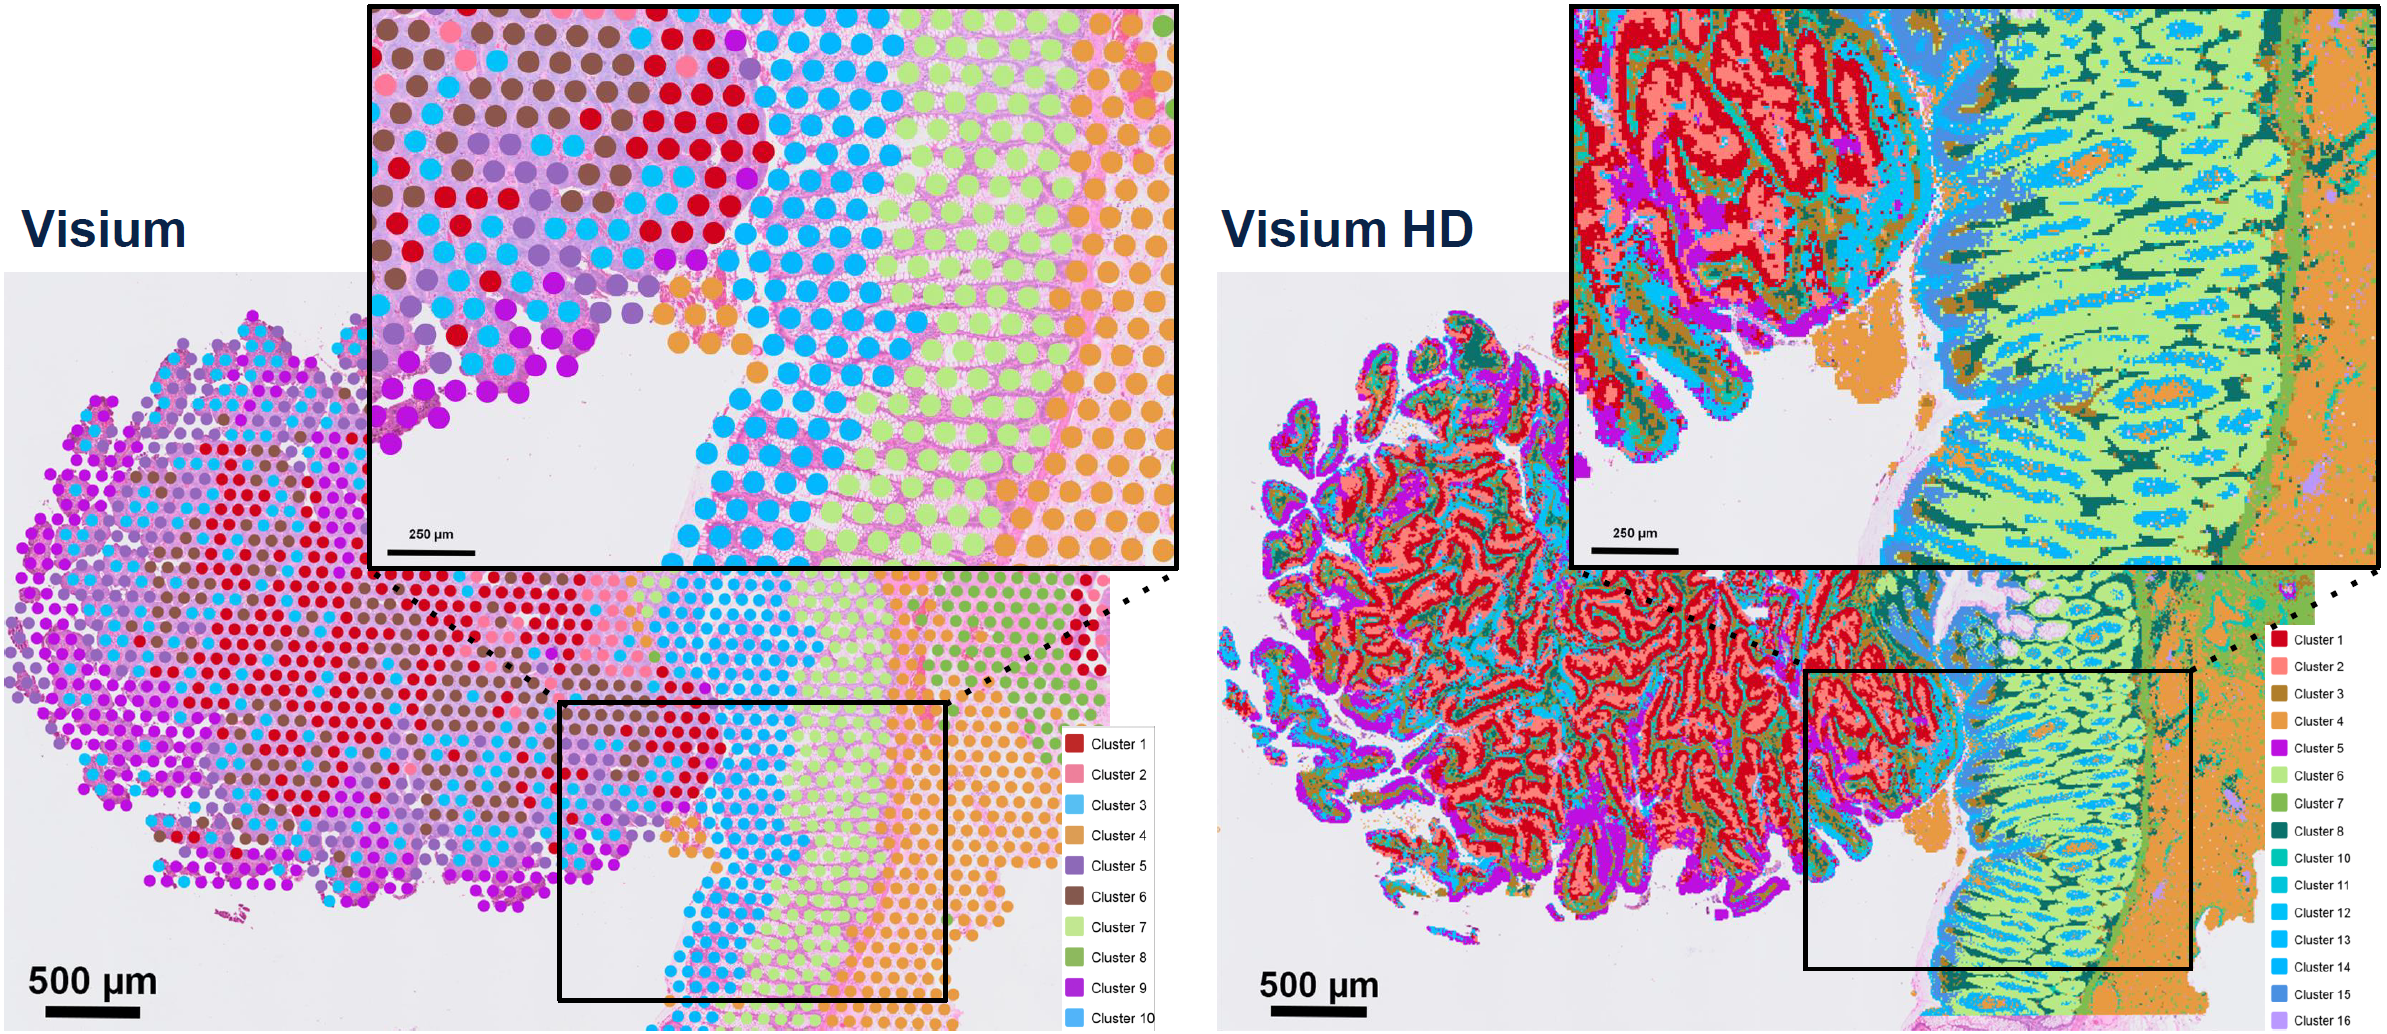 spatial analysis of colorectal cancer comparing Visium with Visium HD resolution